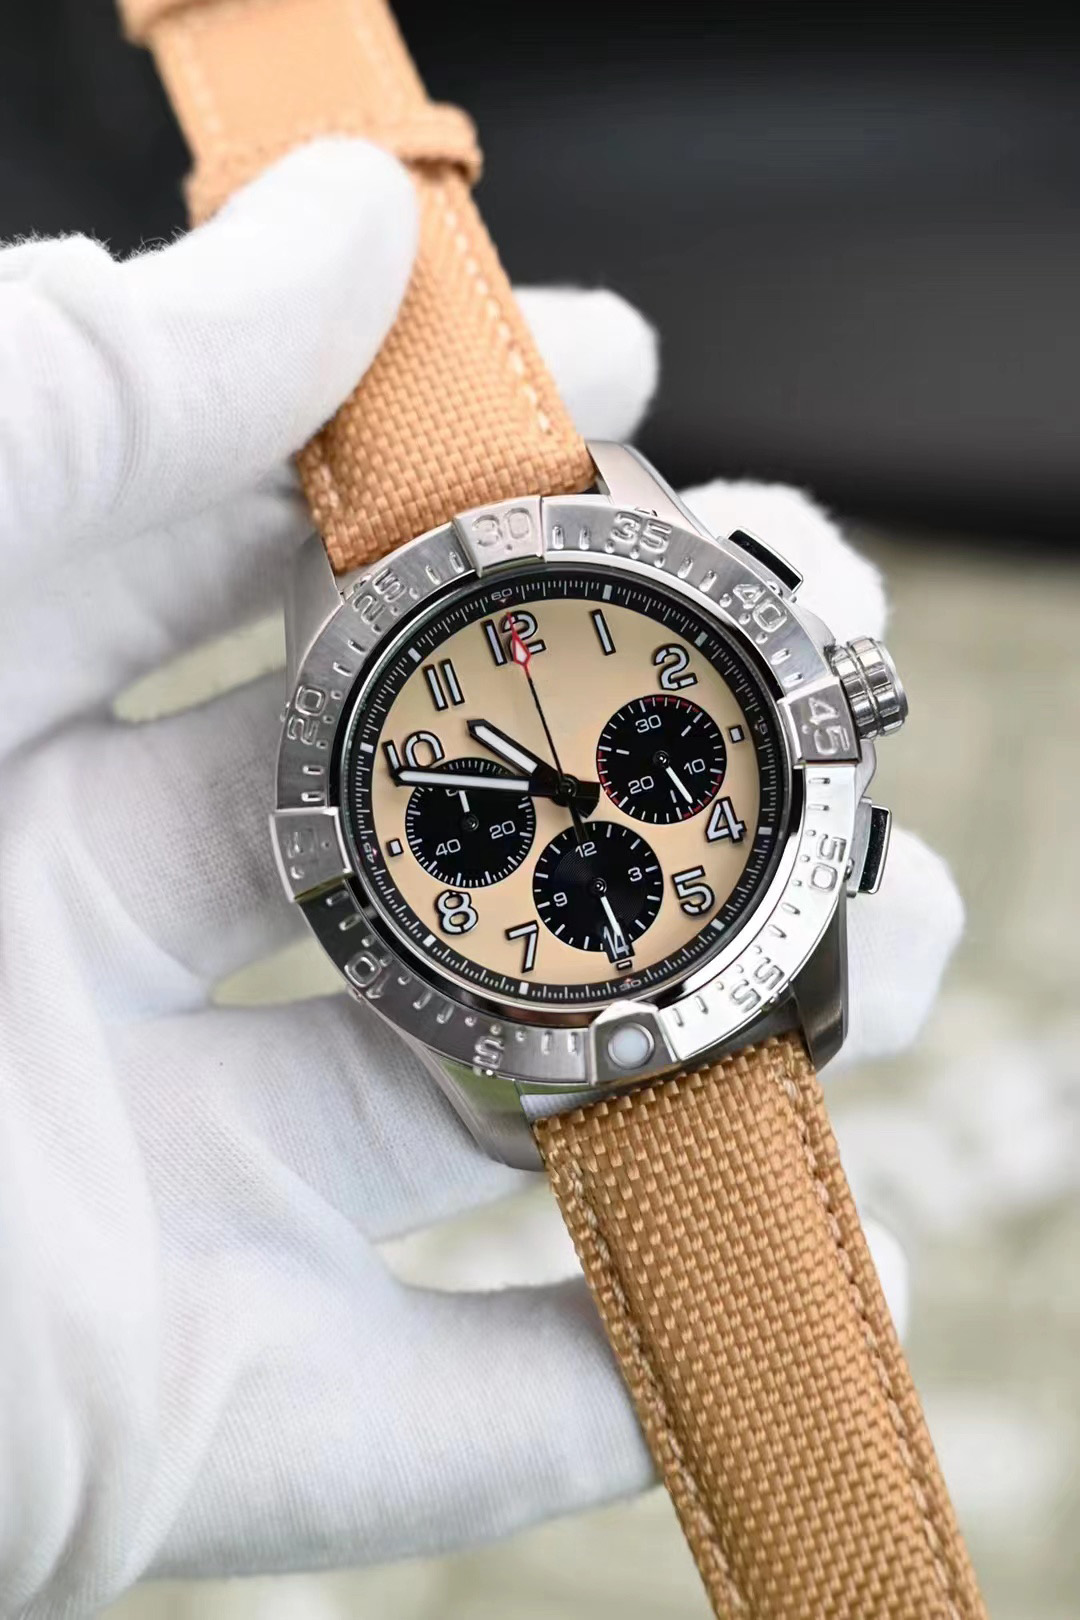 Luxury men's sports watch japan quartz movement Chronograph button working rotary crown waterproof matching multiple colors fabric strap comfortable and durable